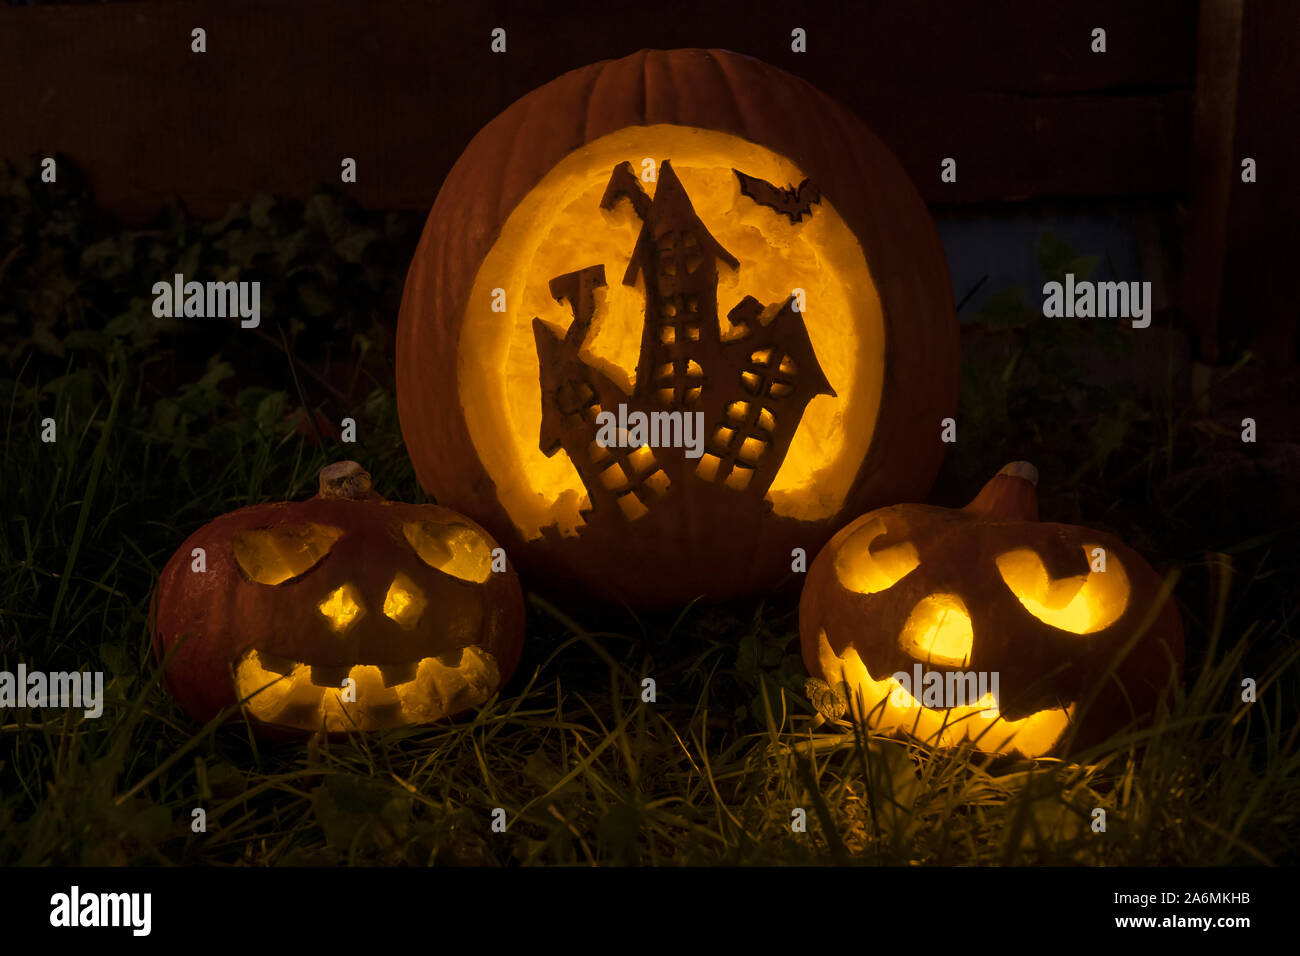 Funny halloween pumpkins with scary house and faces Stock Photo